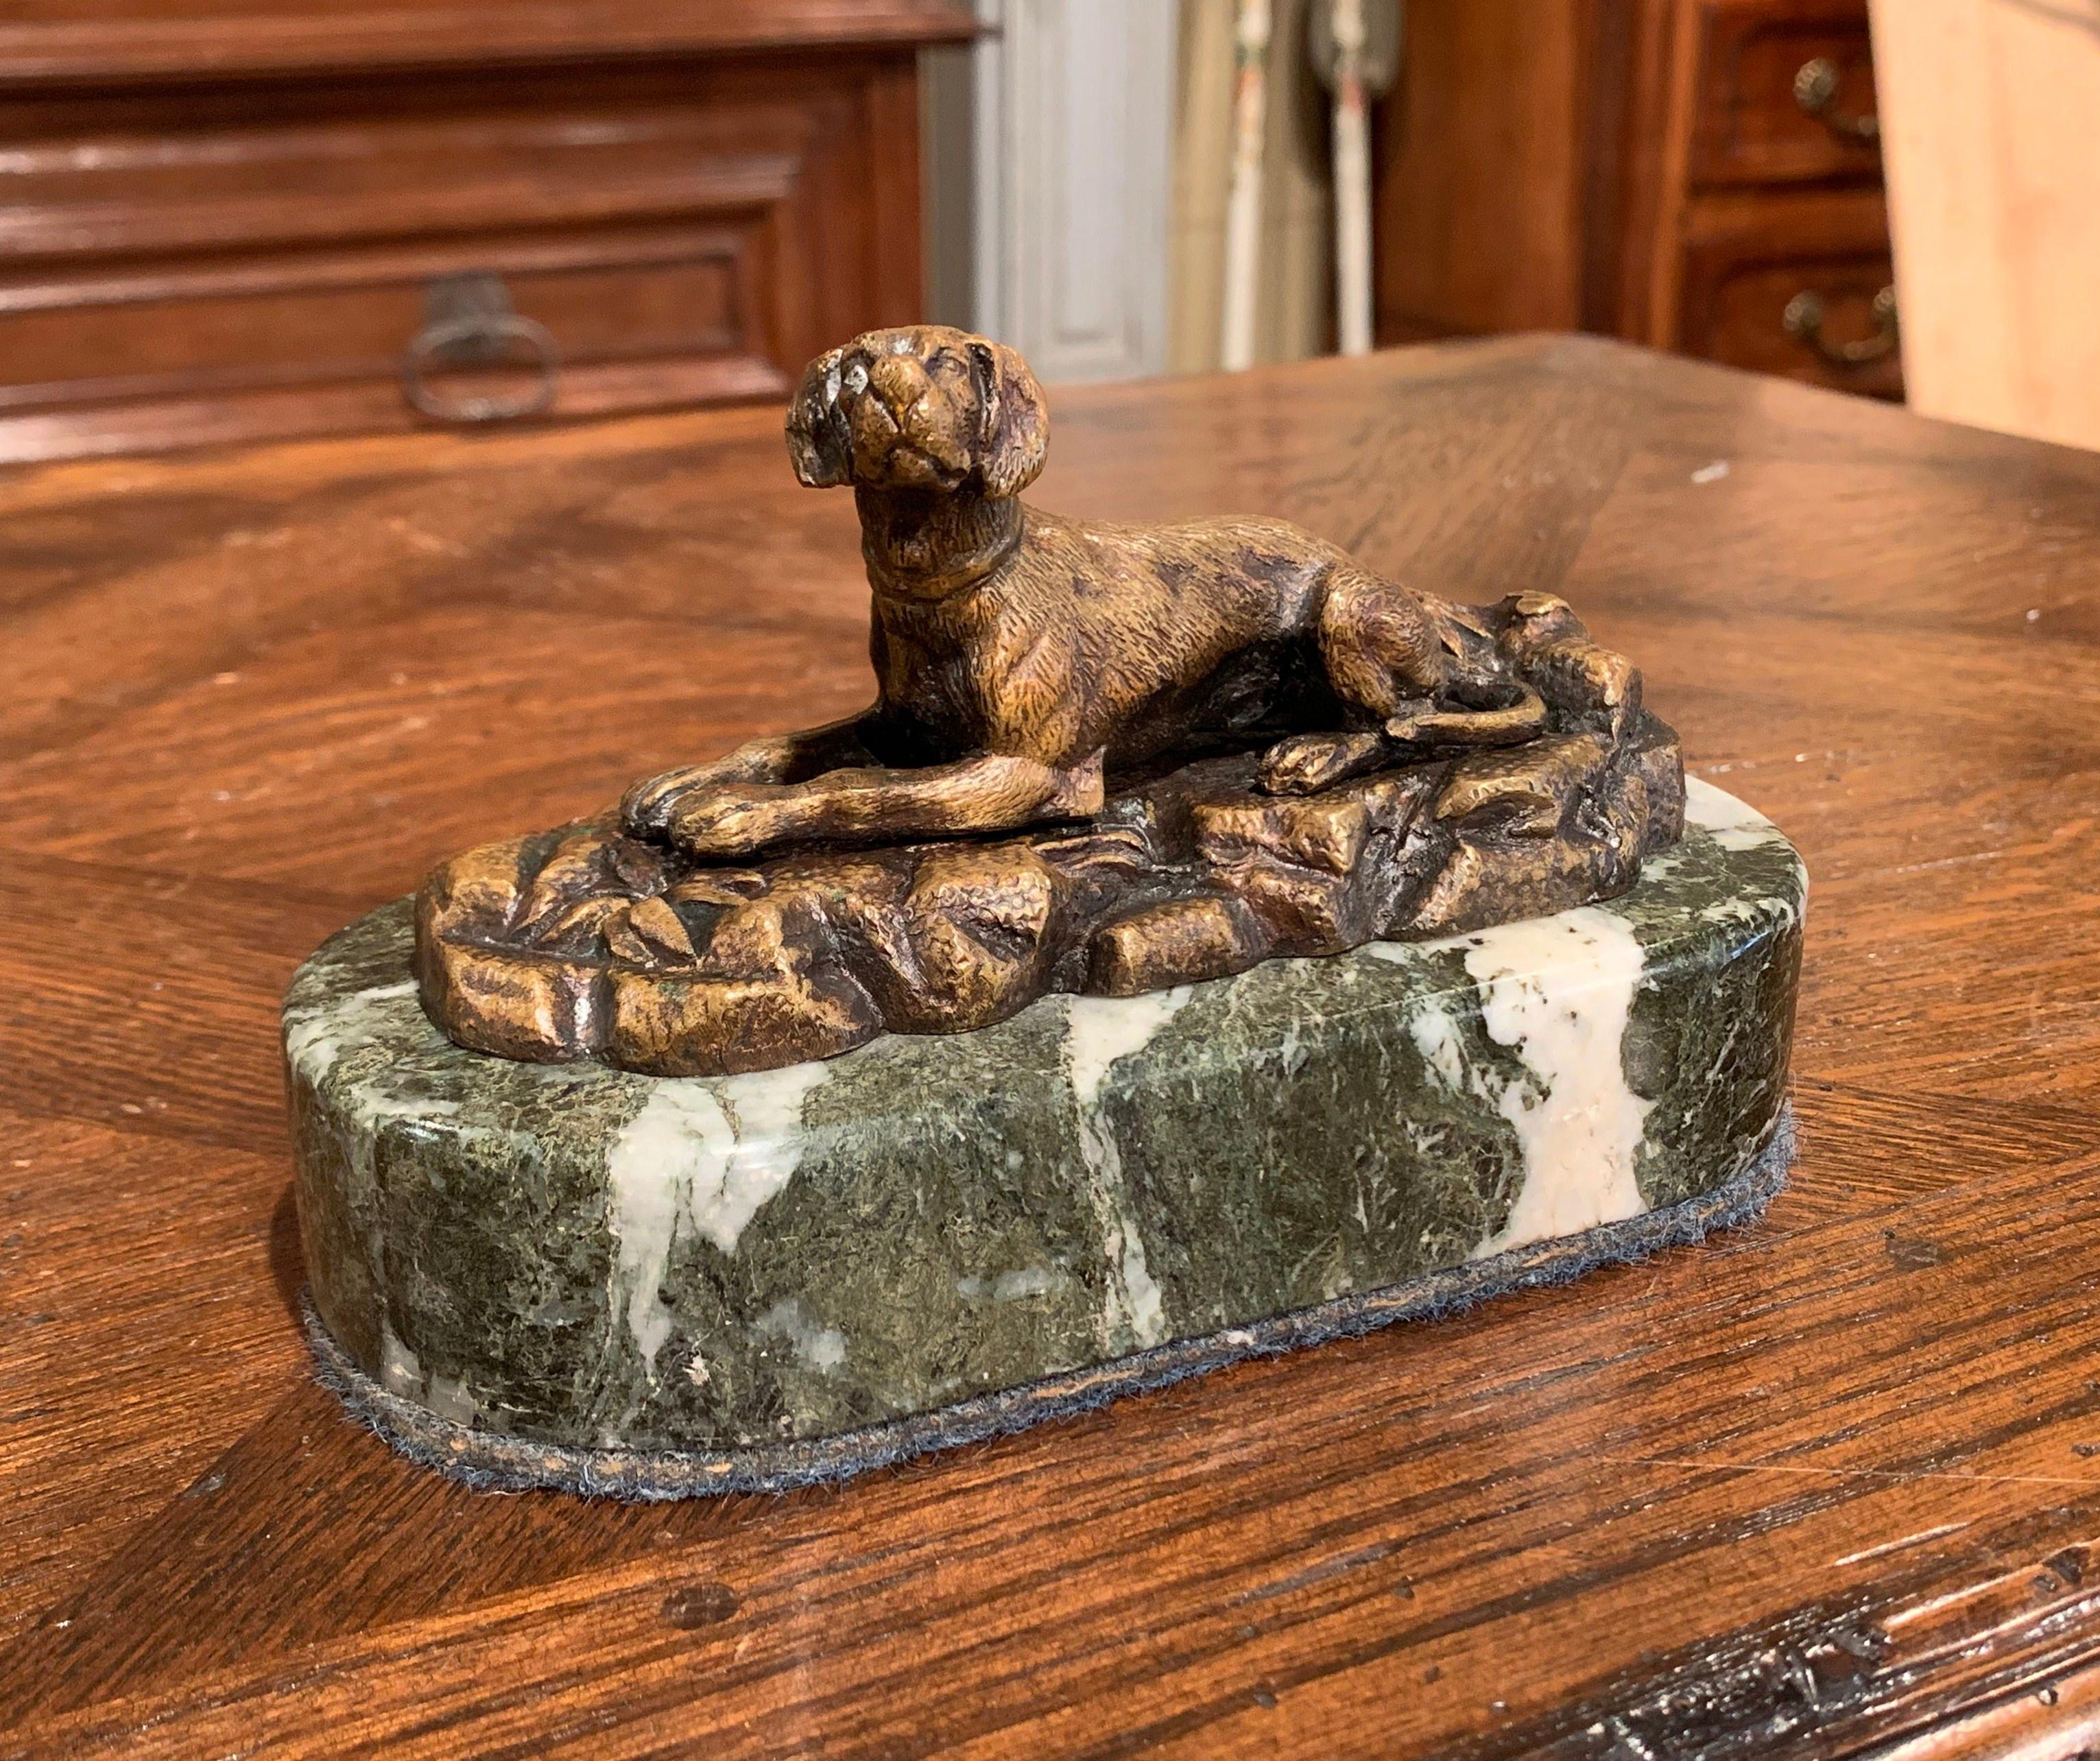 This antique dog sculpture paperweight was created in France, circa 1880. Standing on an oval grey and white marble base with bottom felt, the sculpture features a hunt dog resting on rocky ground in the manner of Thomas Cartier or Christophe